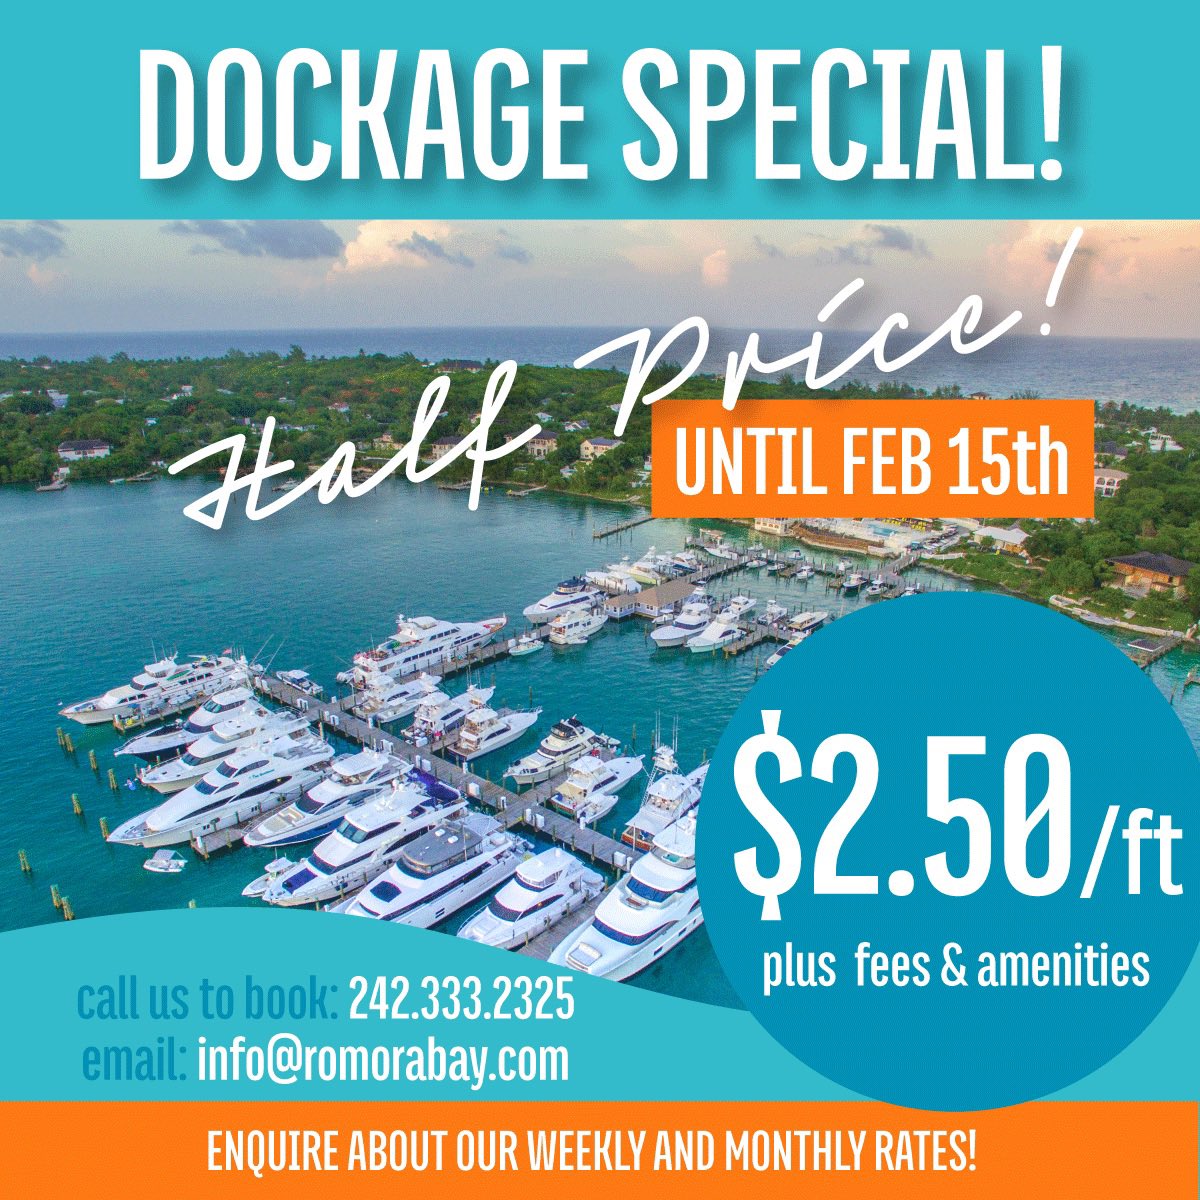 It’s that time of year again…our only big sale of the season, so take advantage of it !
Book today for discounted dockage through February 15th !
#harbourisland #bahamas #romorabay #itsbetterinthebahamas